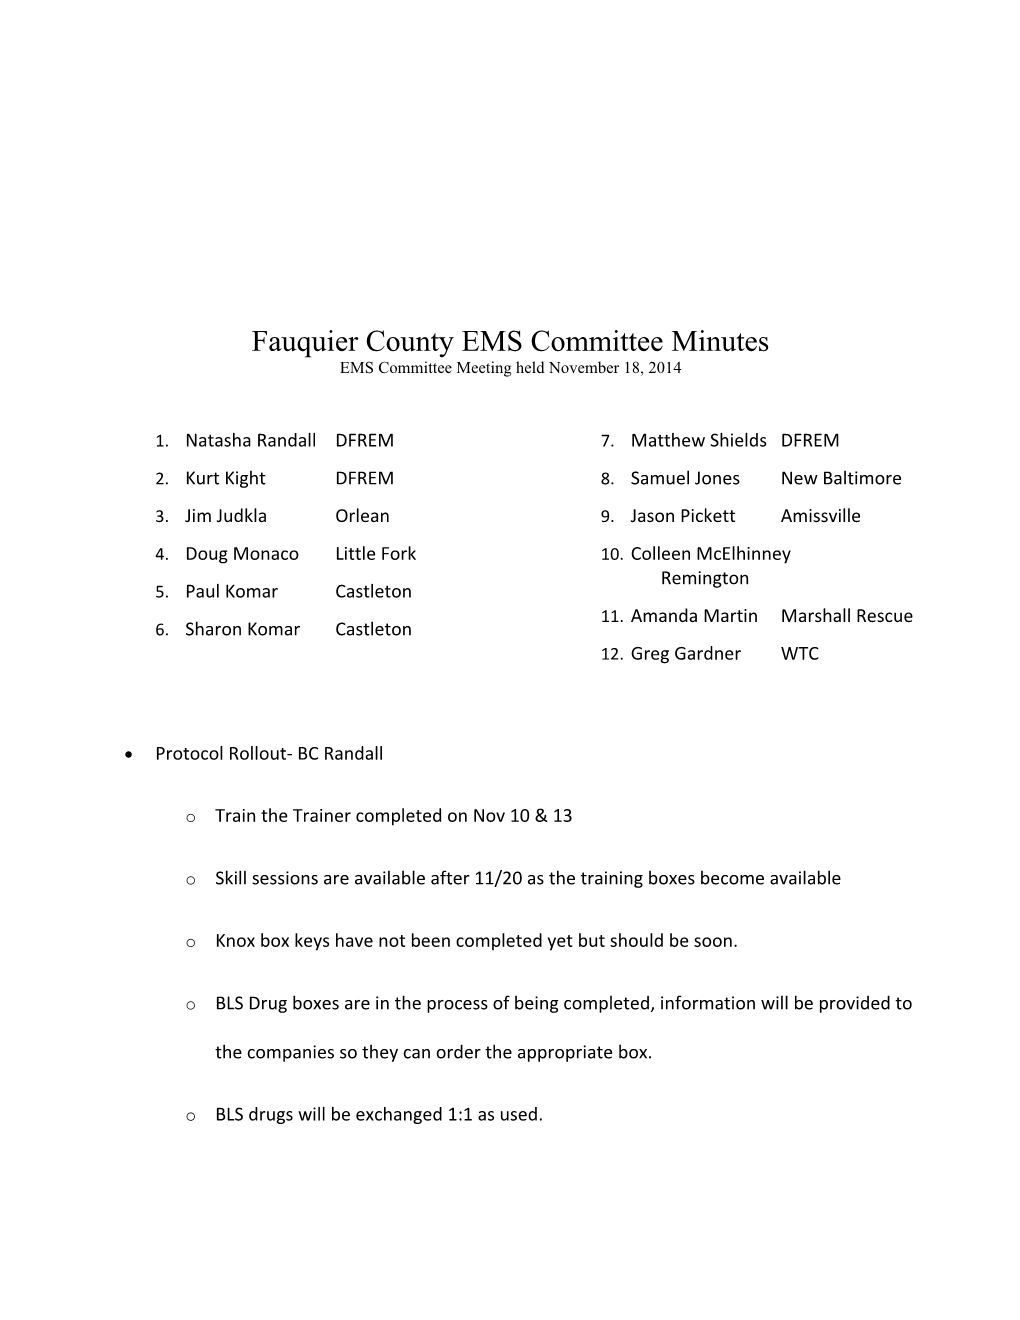 Fauquier County EMS Committeeminutes